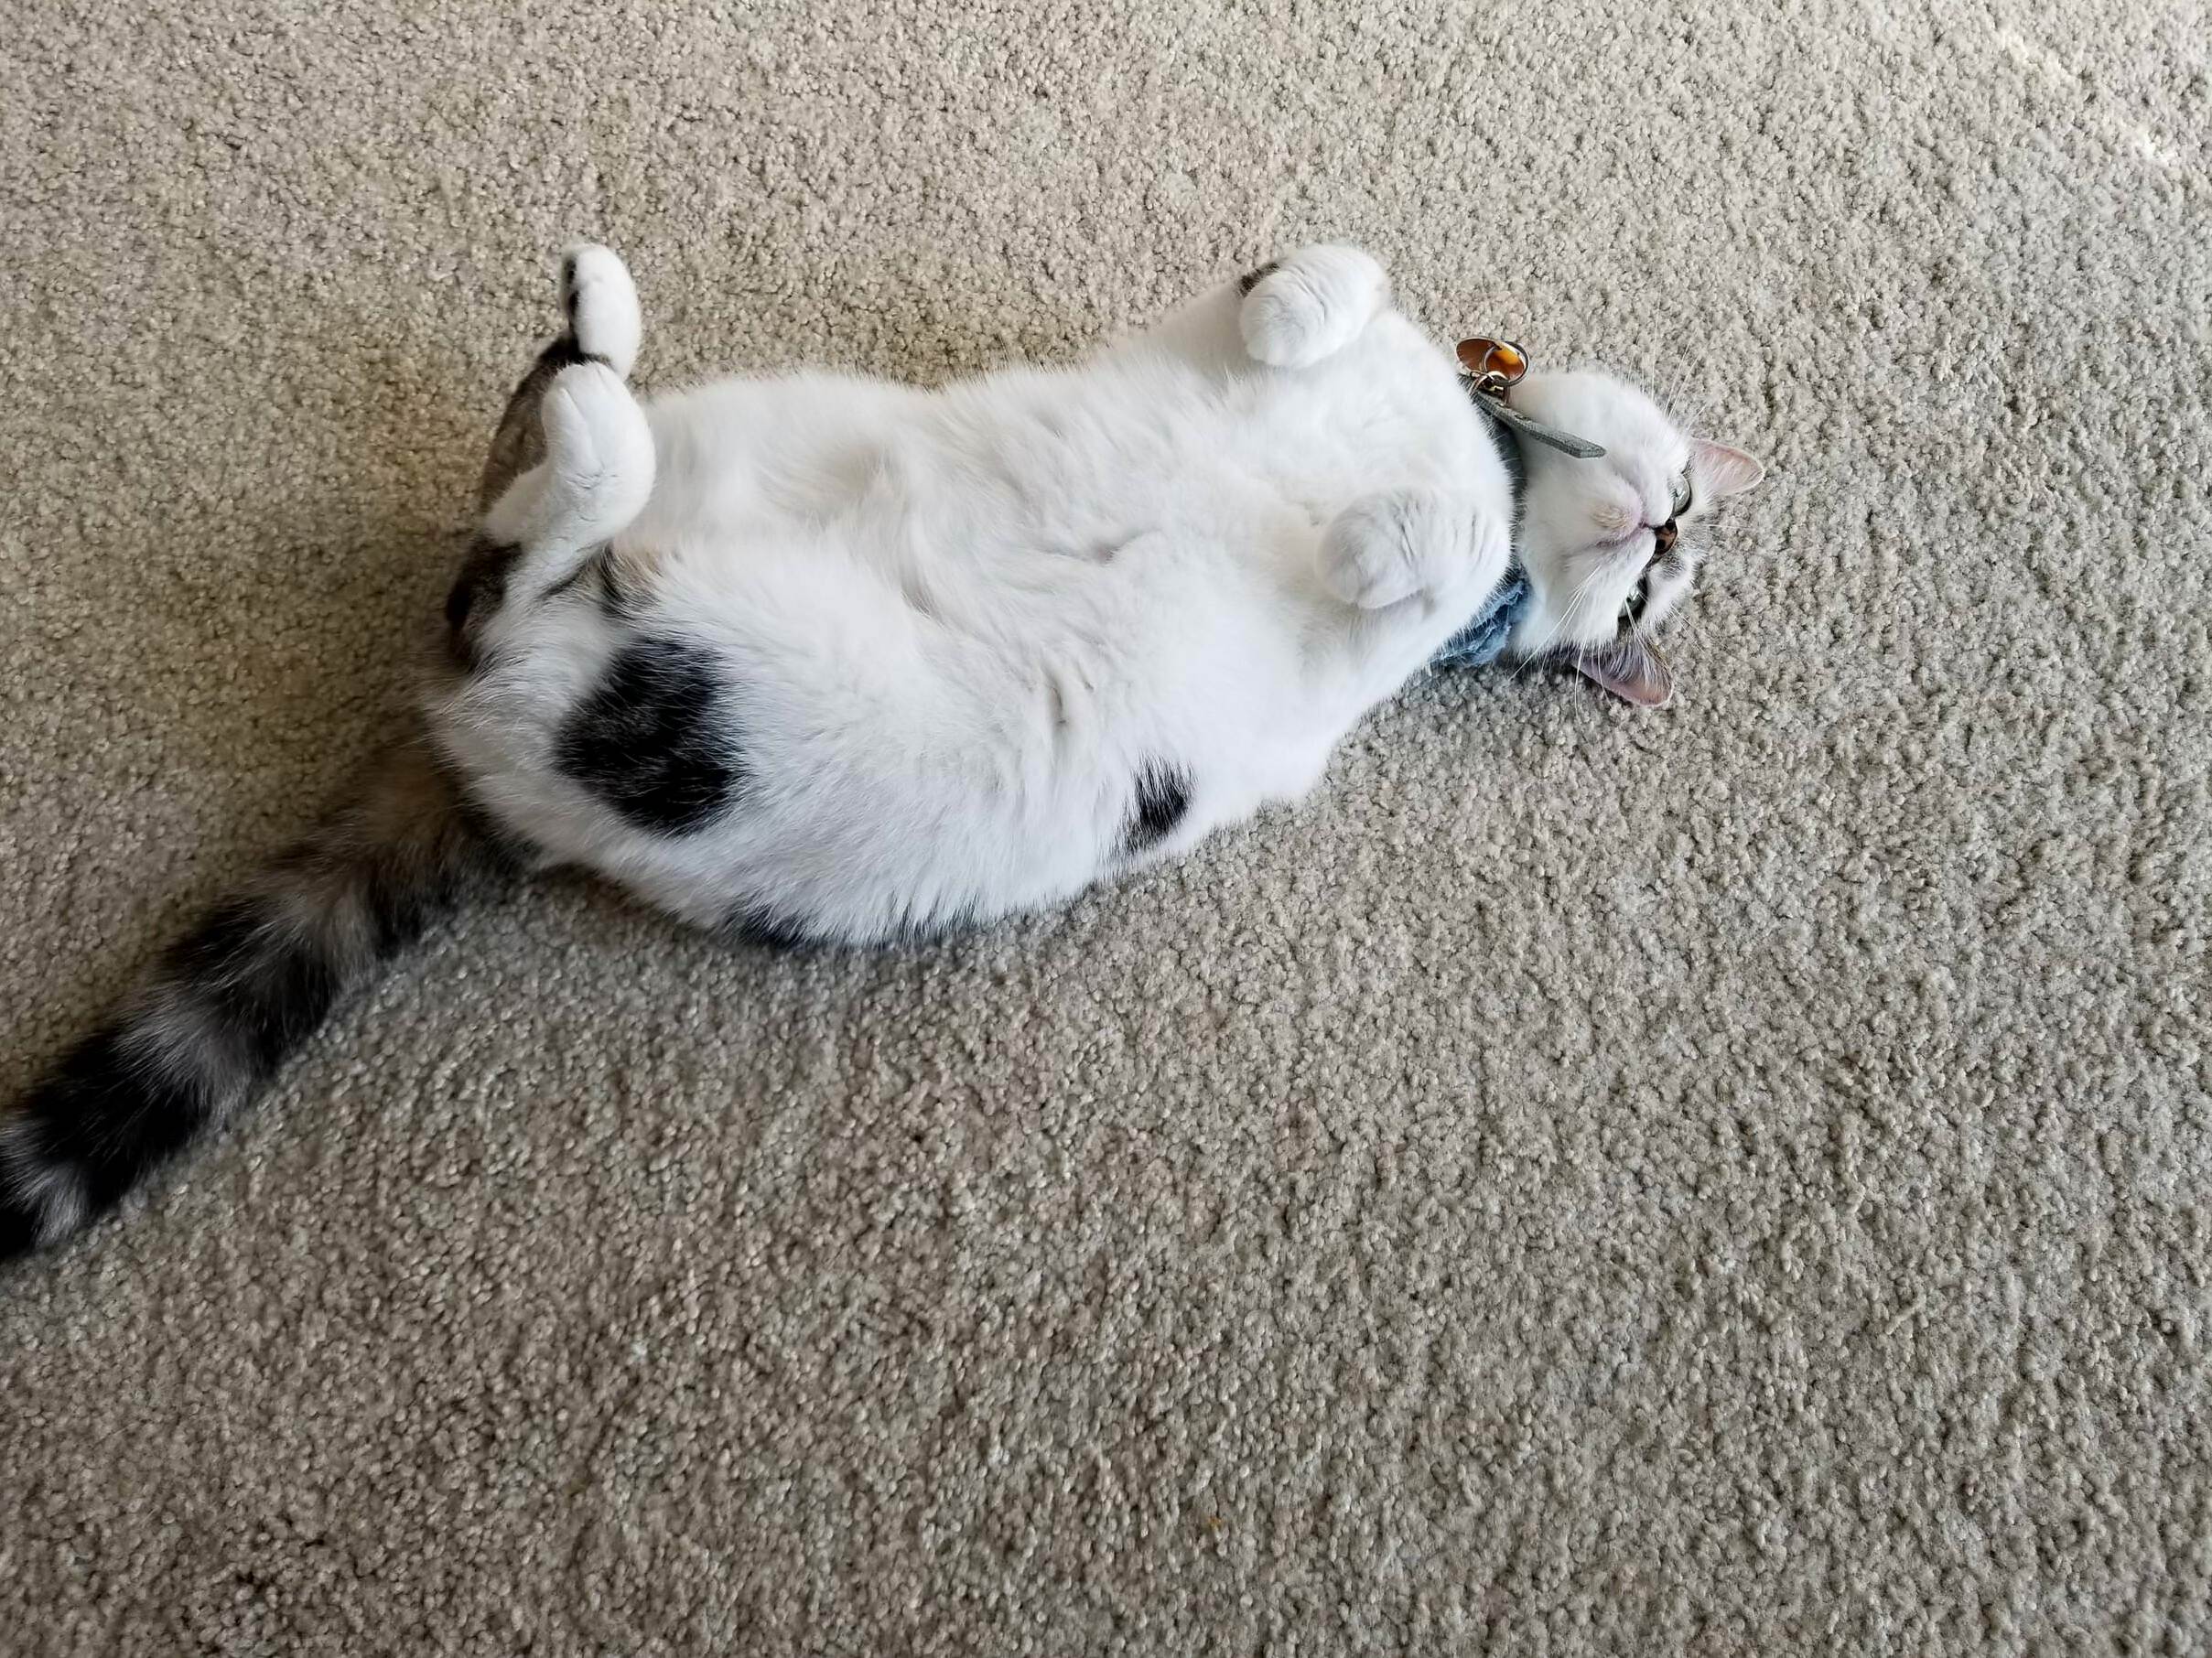 Curie has a heart on her butt that you can only see when shes feeling frisky and rolling around on her back.